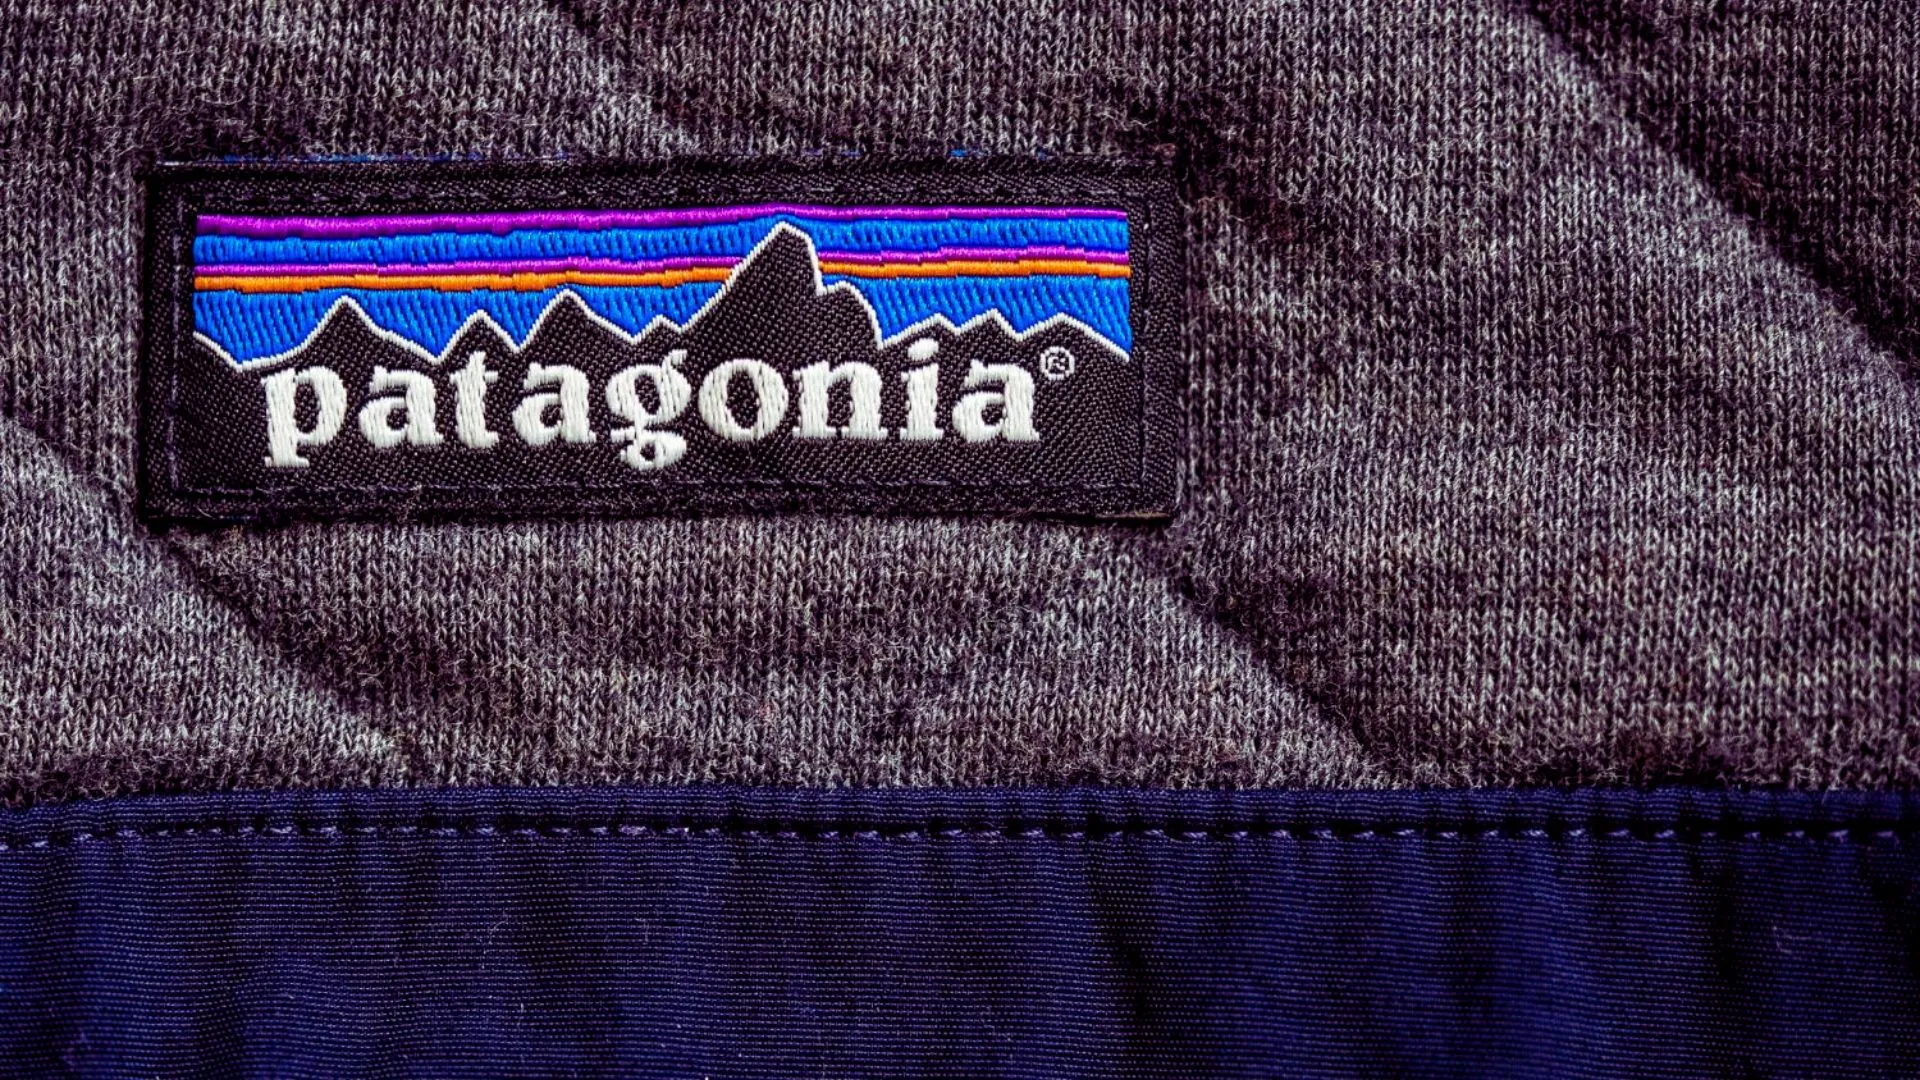 Who is the owner of Patagonia